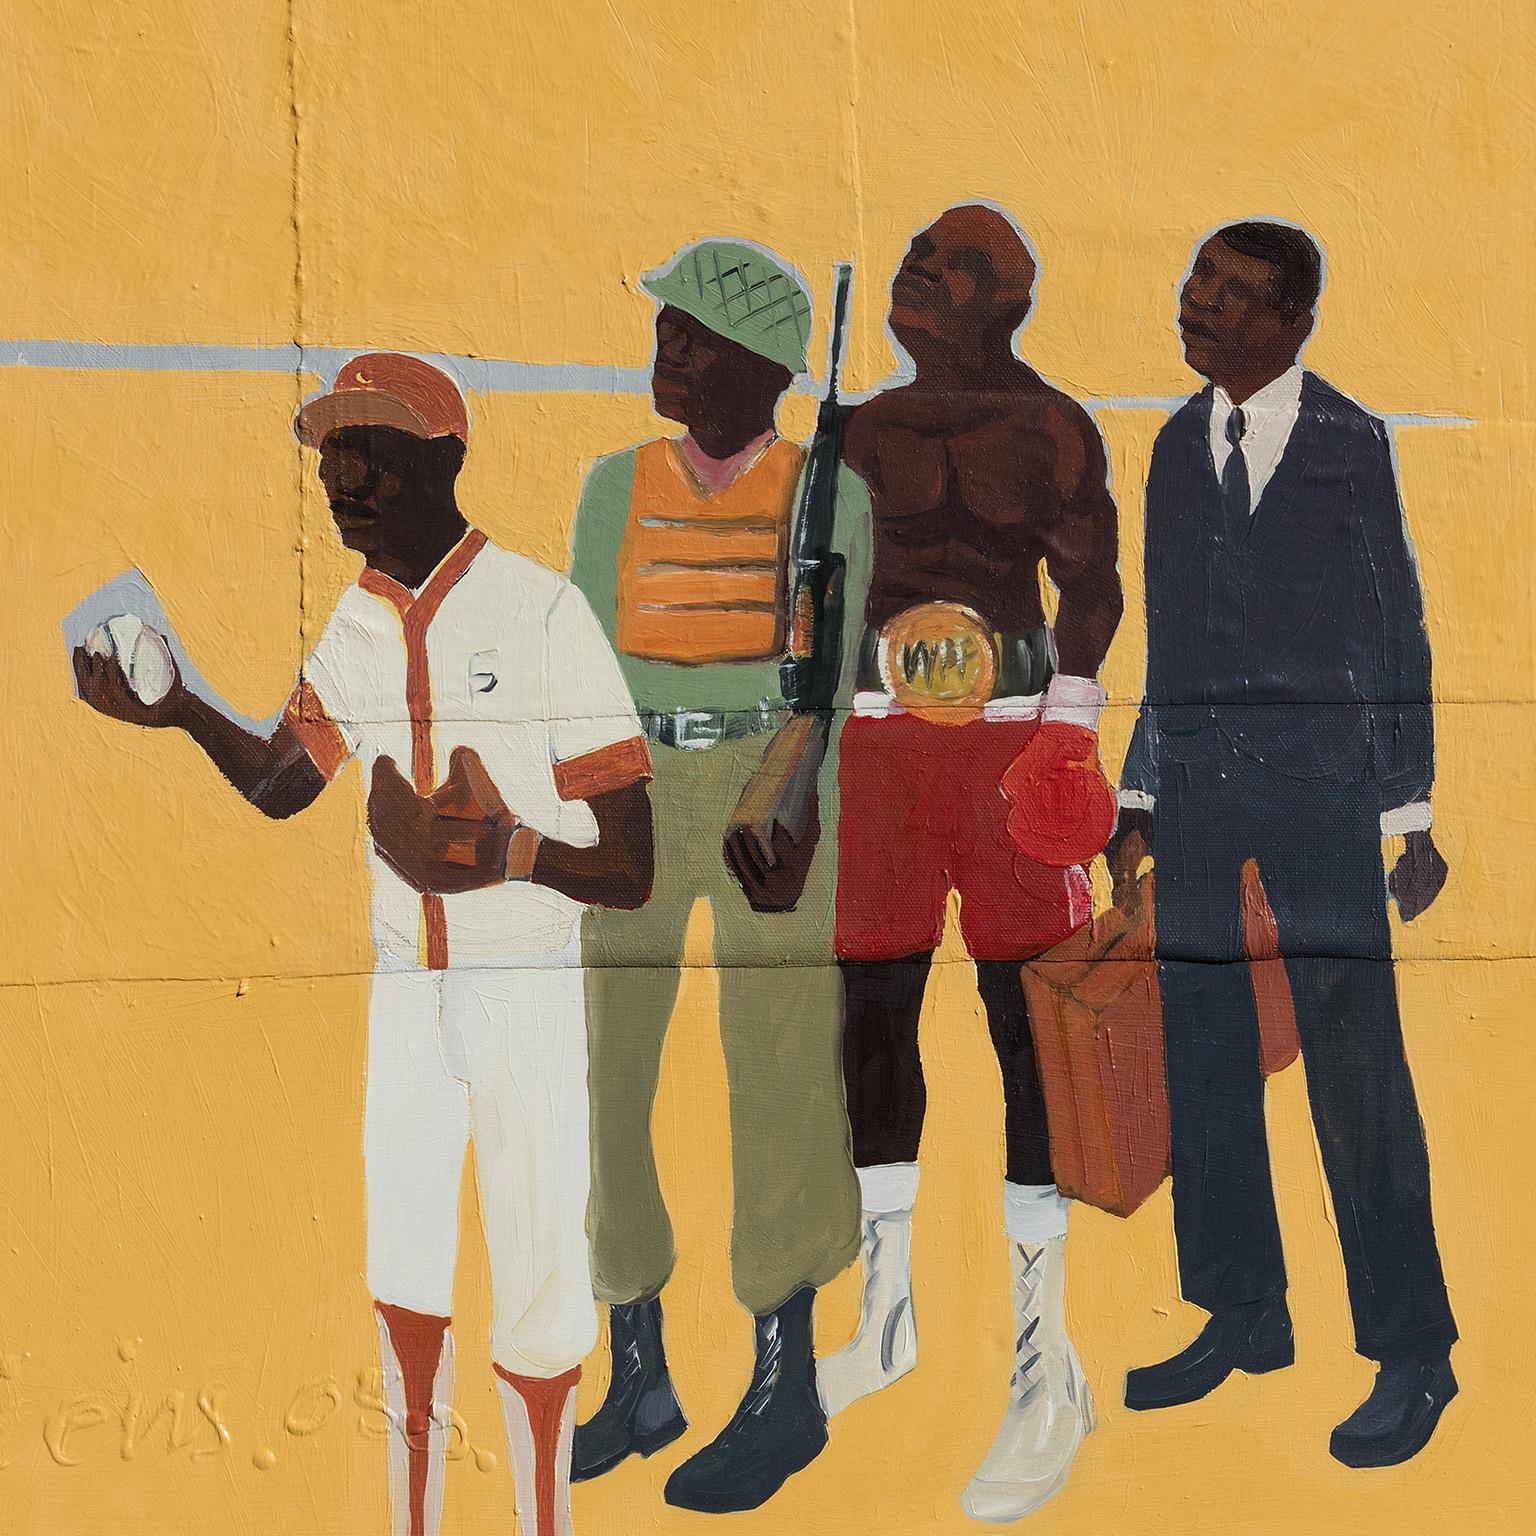 Hero - African American Baseball Player, Boxer, Soldier, and Businessman - Painting by Francks Deceus